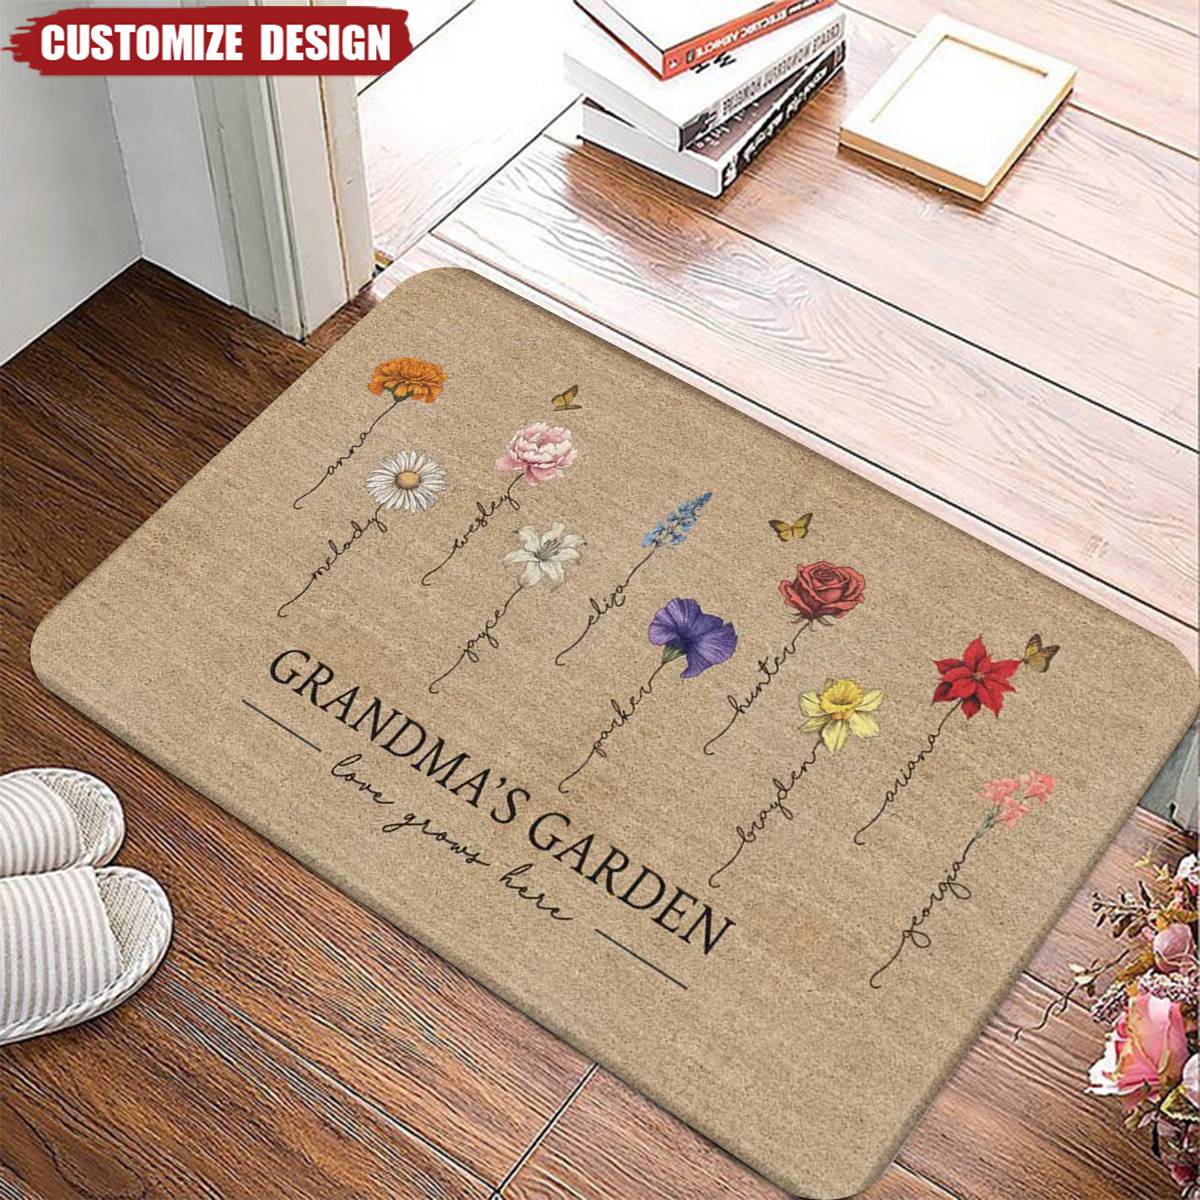 Grandma's Garden Love Grows Here - Personalized Doormat - Mother's Day Gift For Mom, Grandma